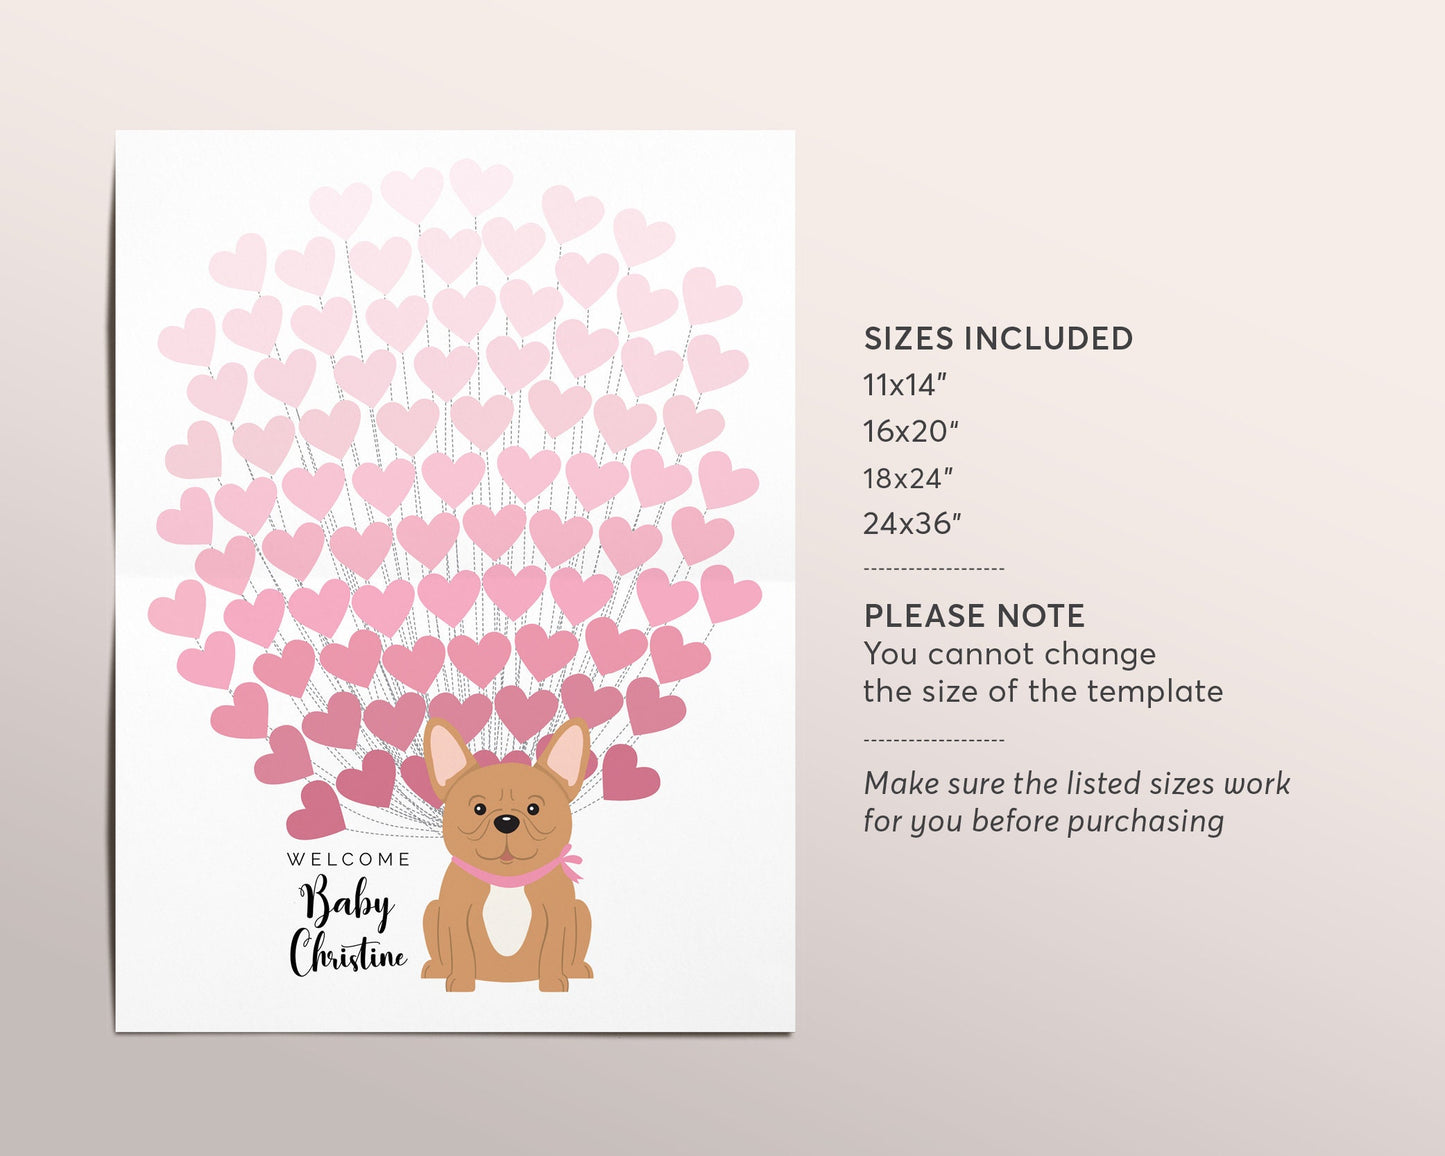 Editable French Bulldog Heart Balloons Baby Girl Baby Shower Guest Book Alternative Template, Dog Puppy Pet Animal Theme Guestbook Sign